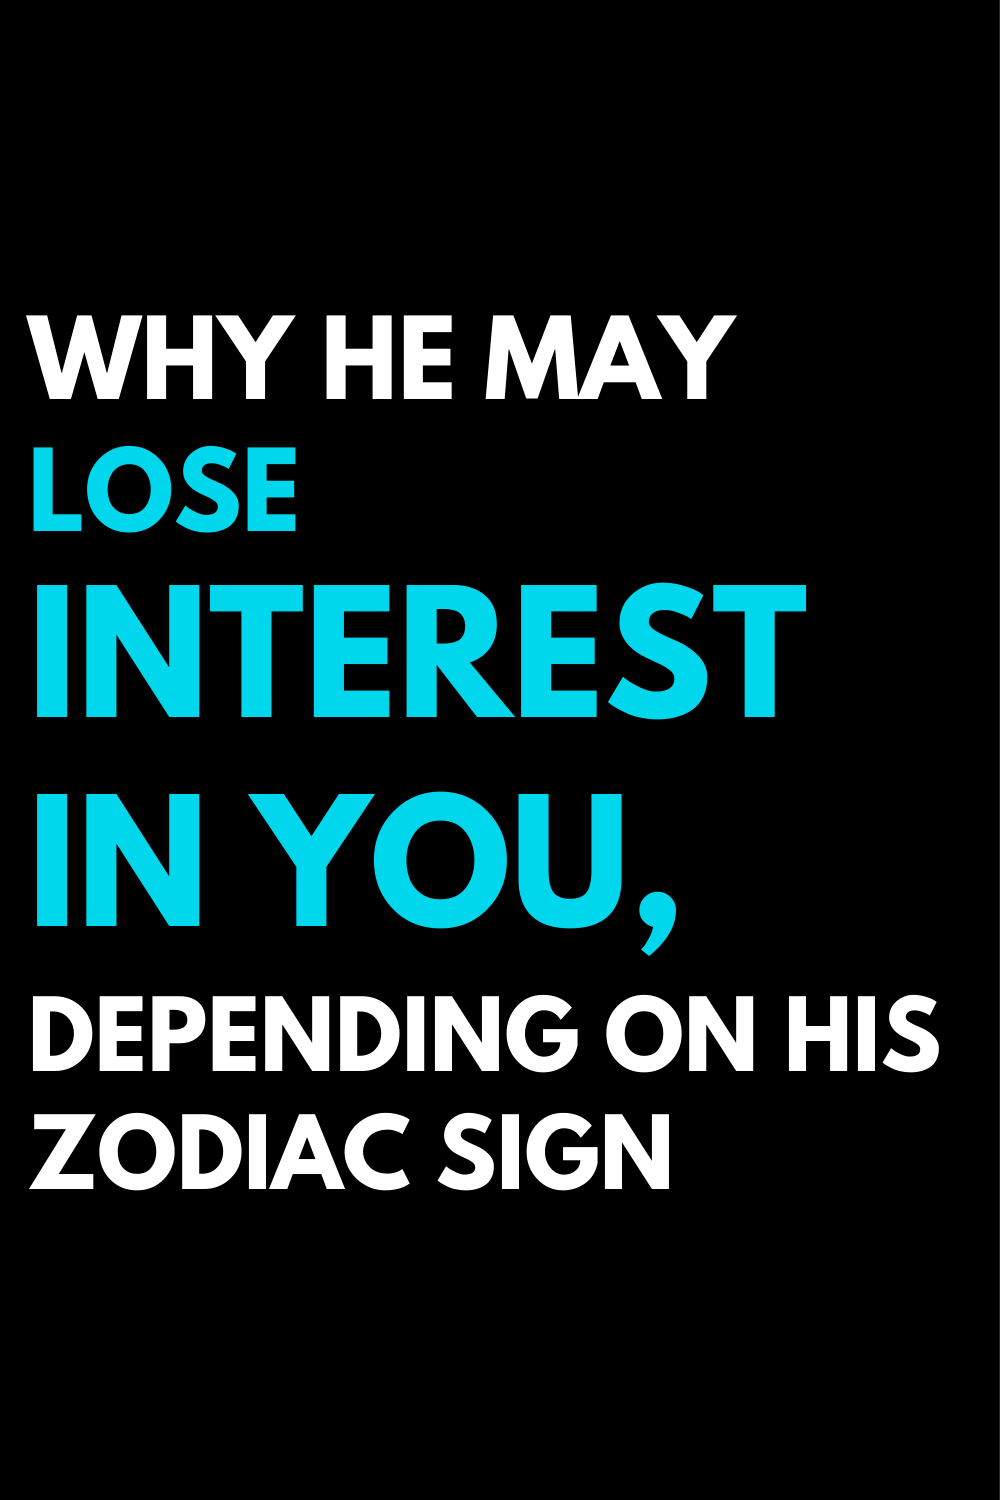 Why he may lose interest in you, depending on his zodiac sign